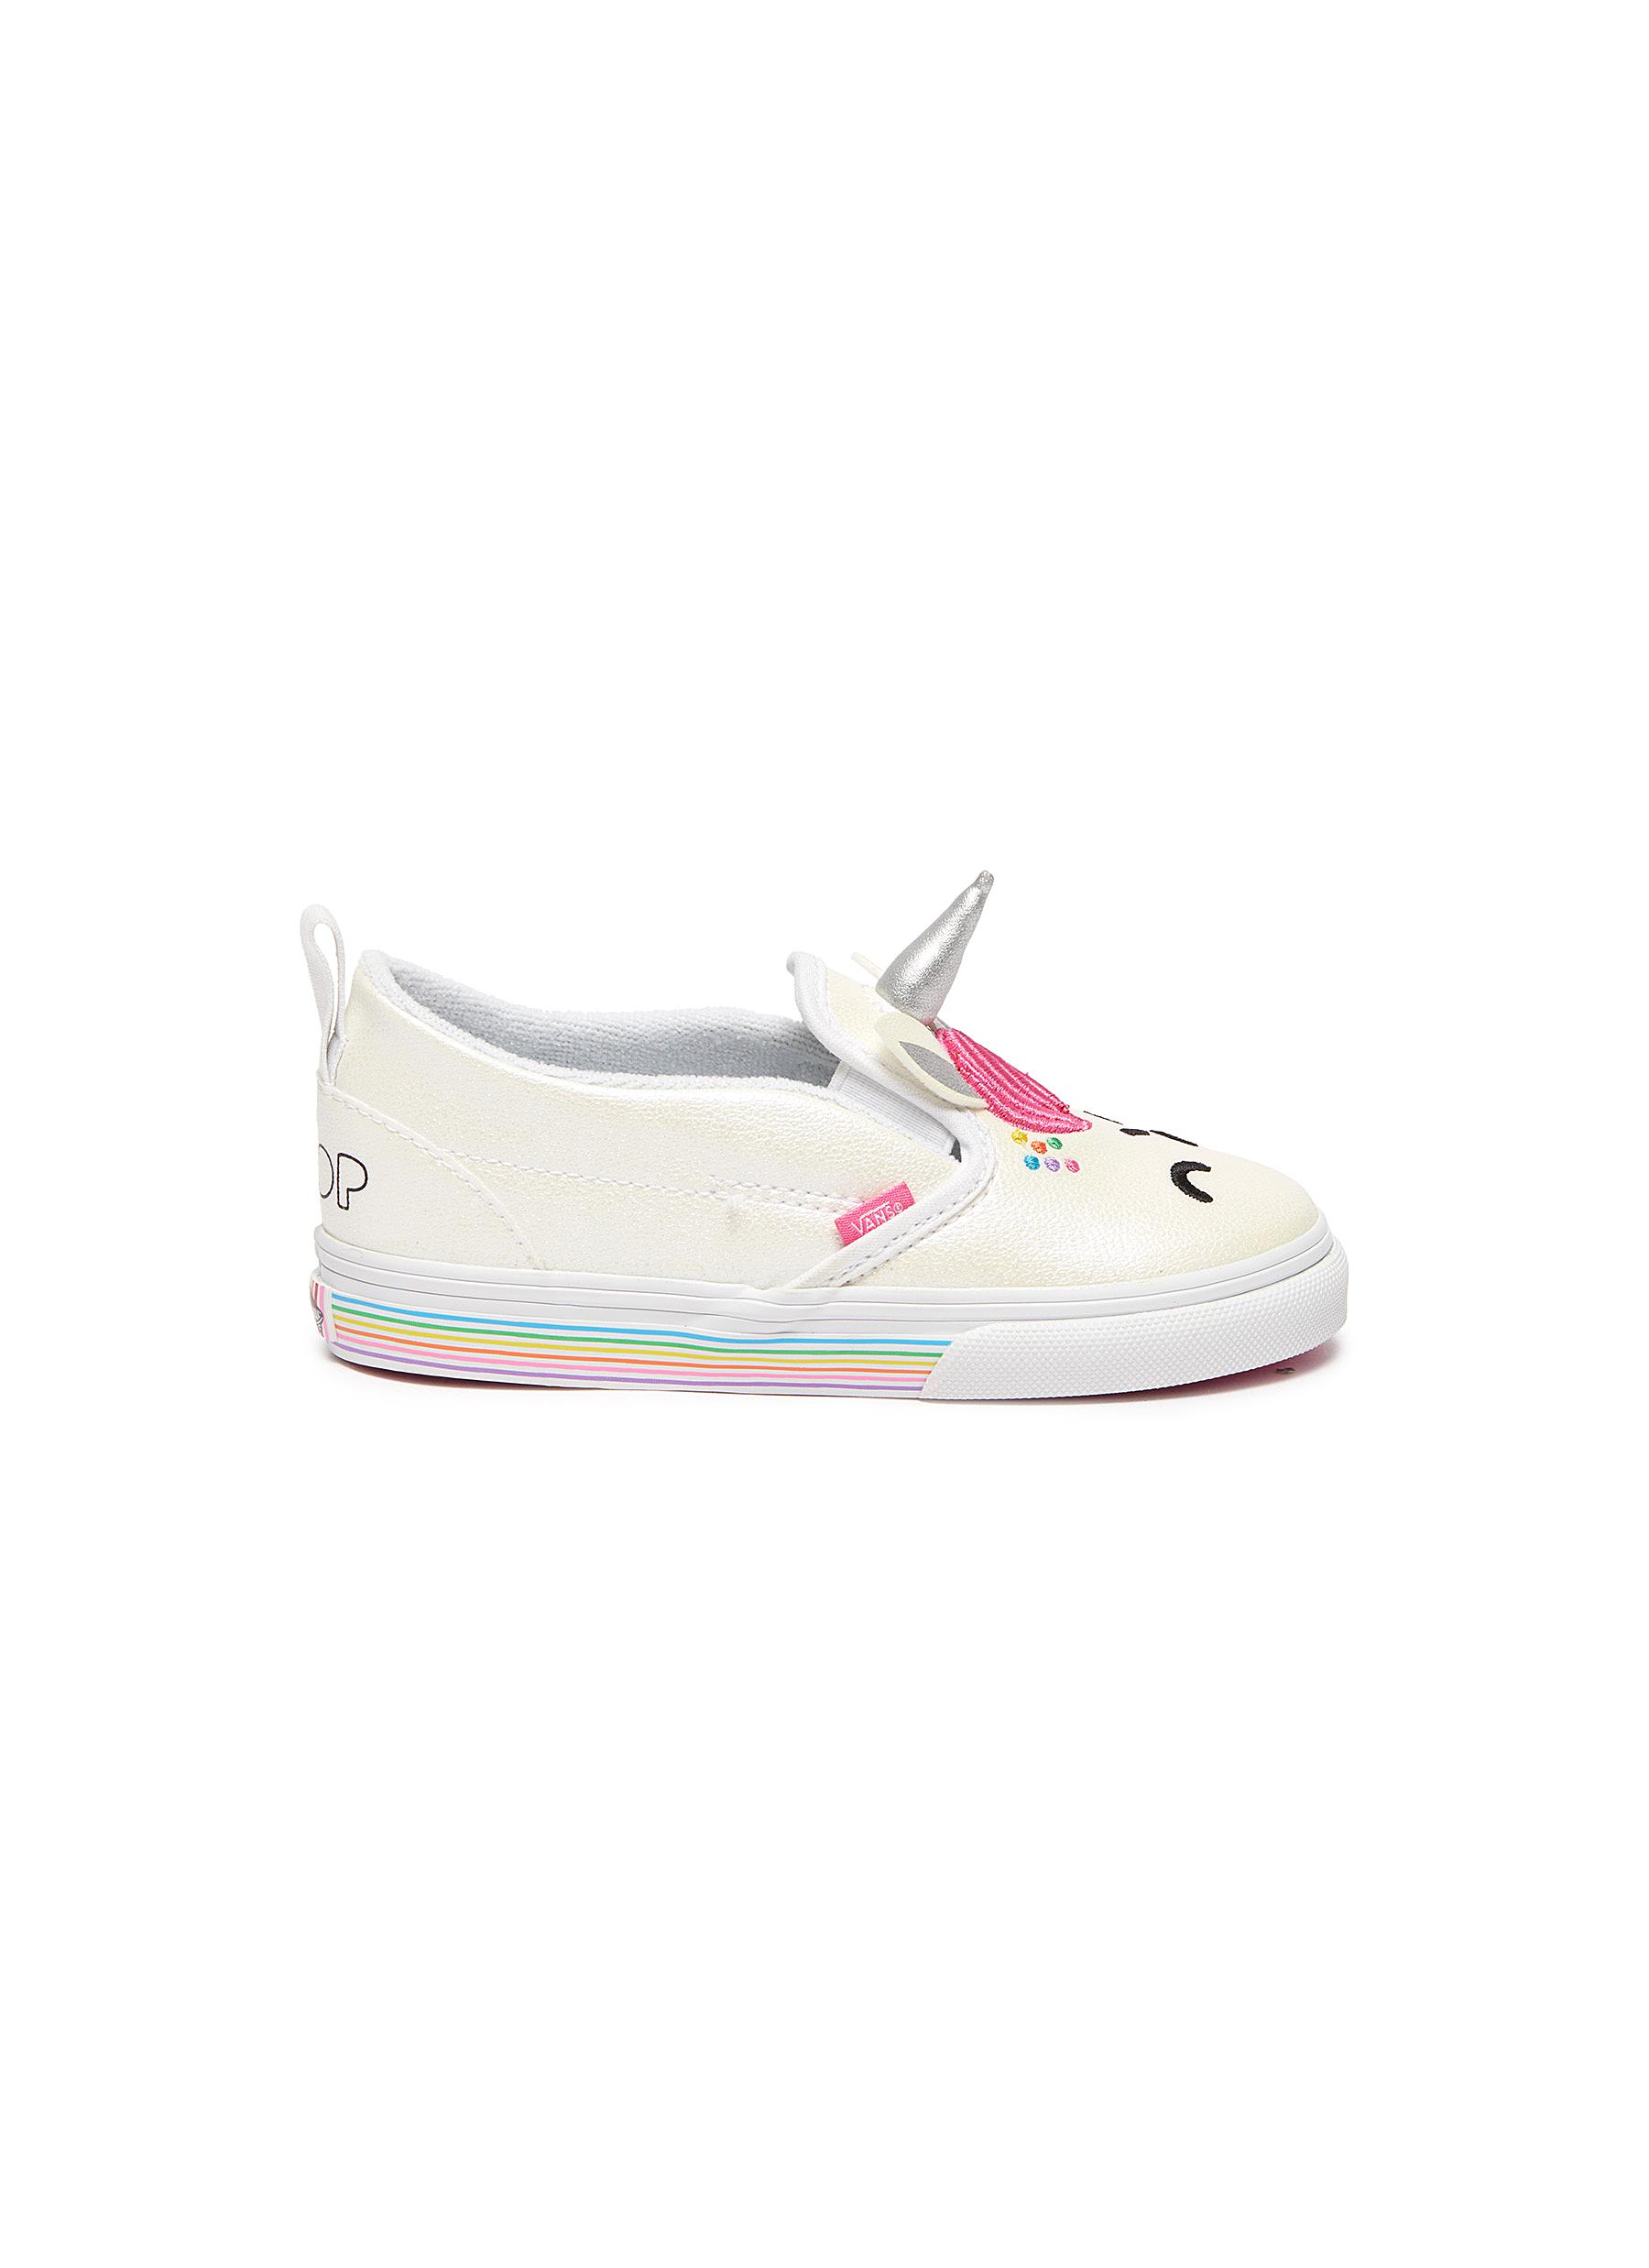 slip on sneakers for toddlers